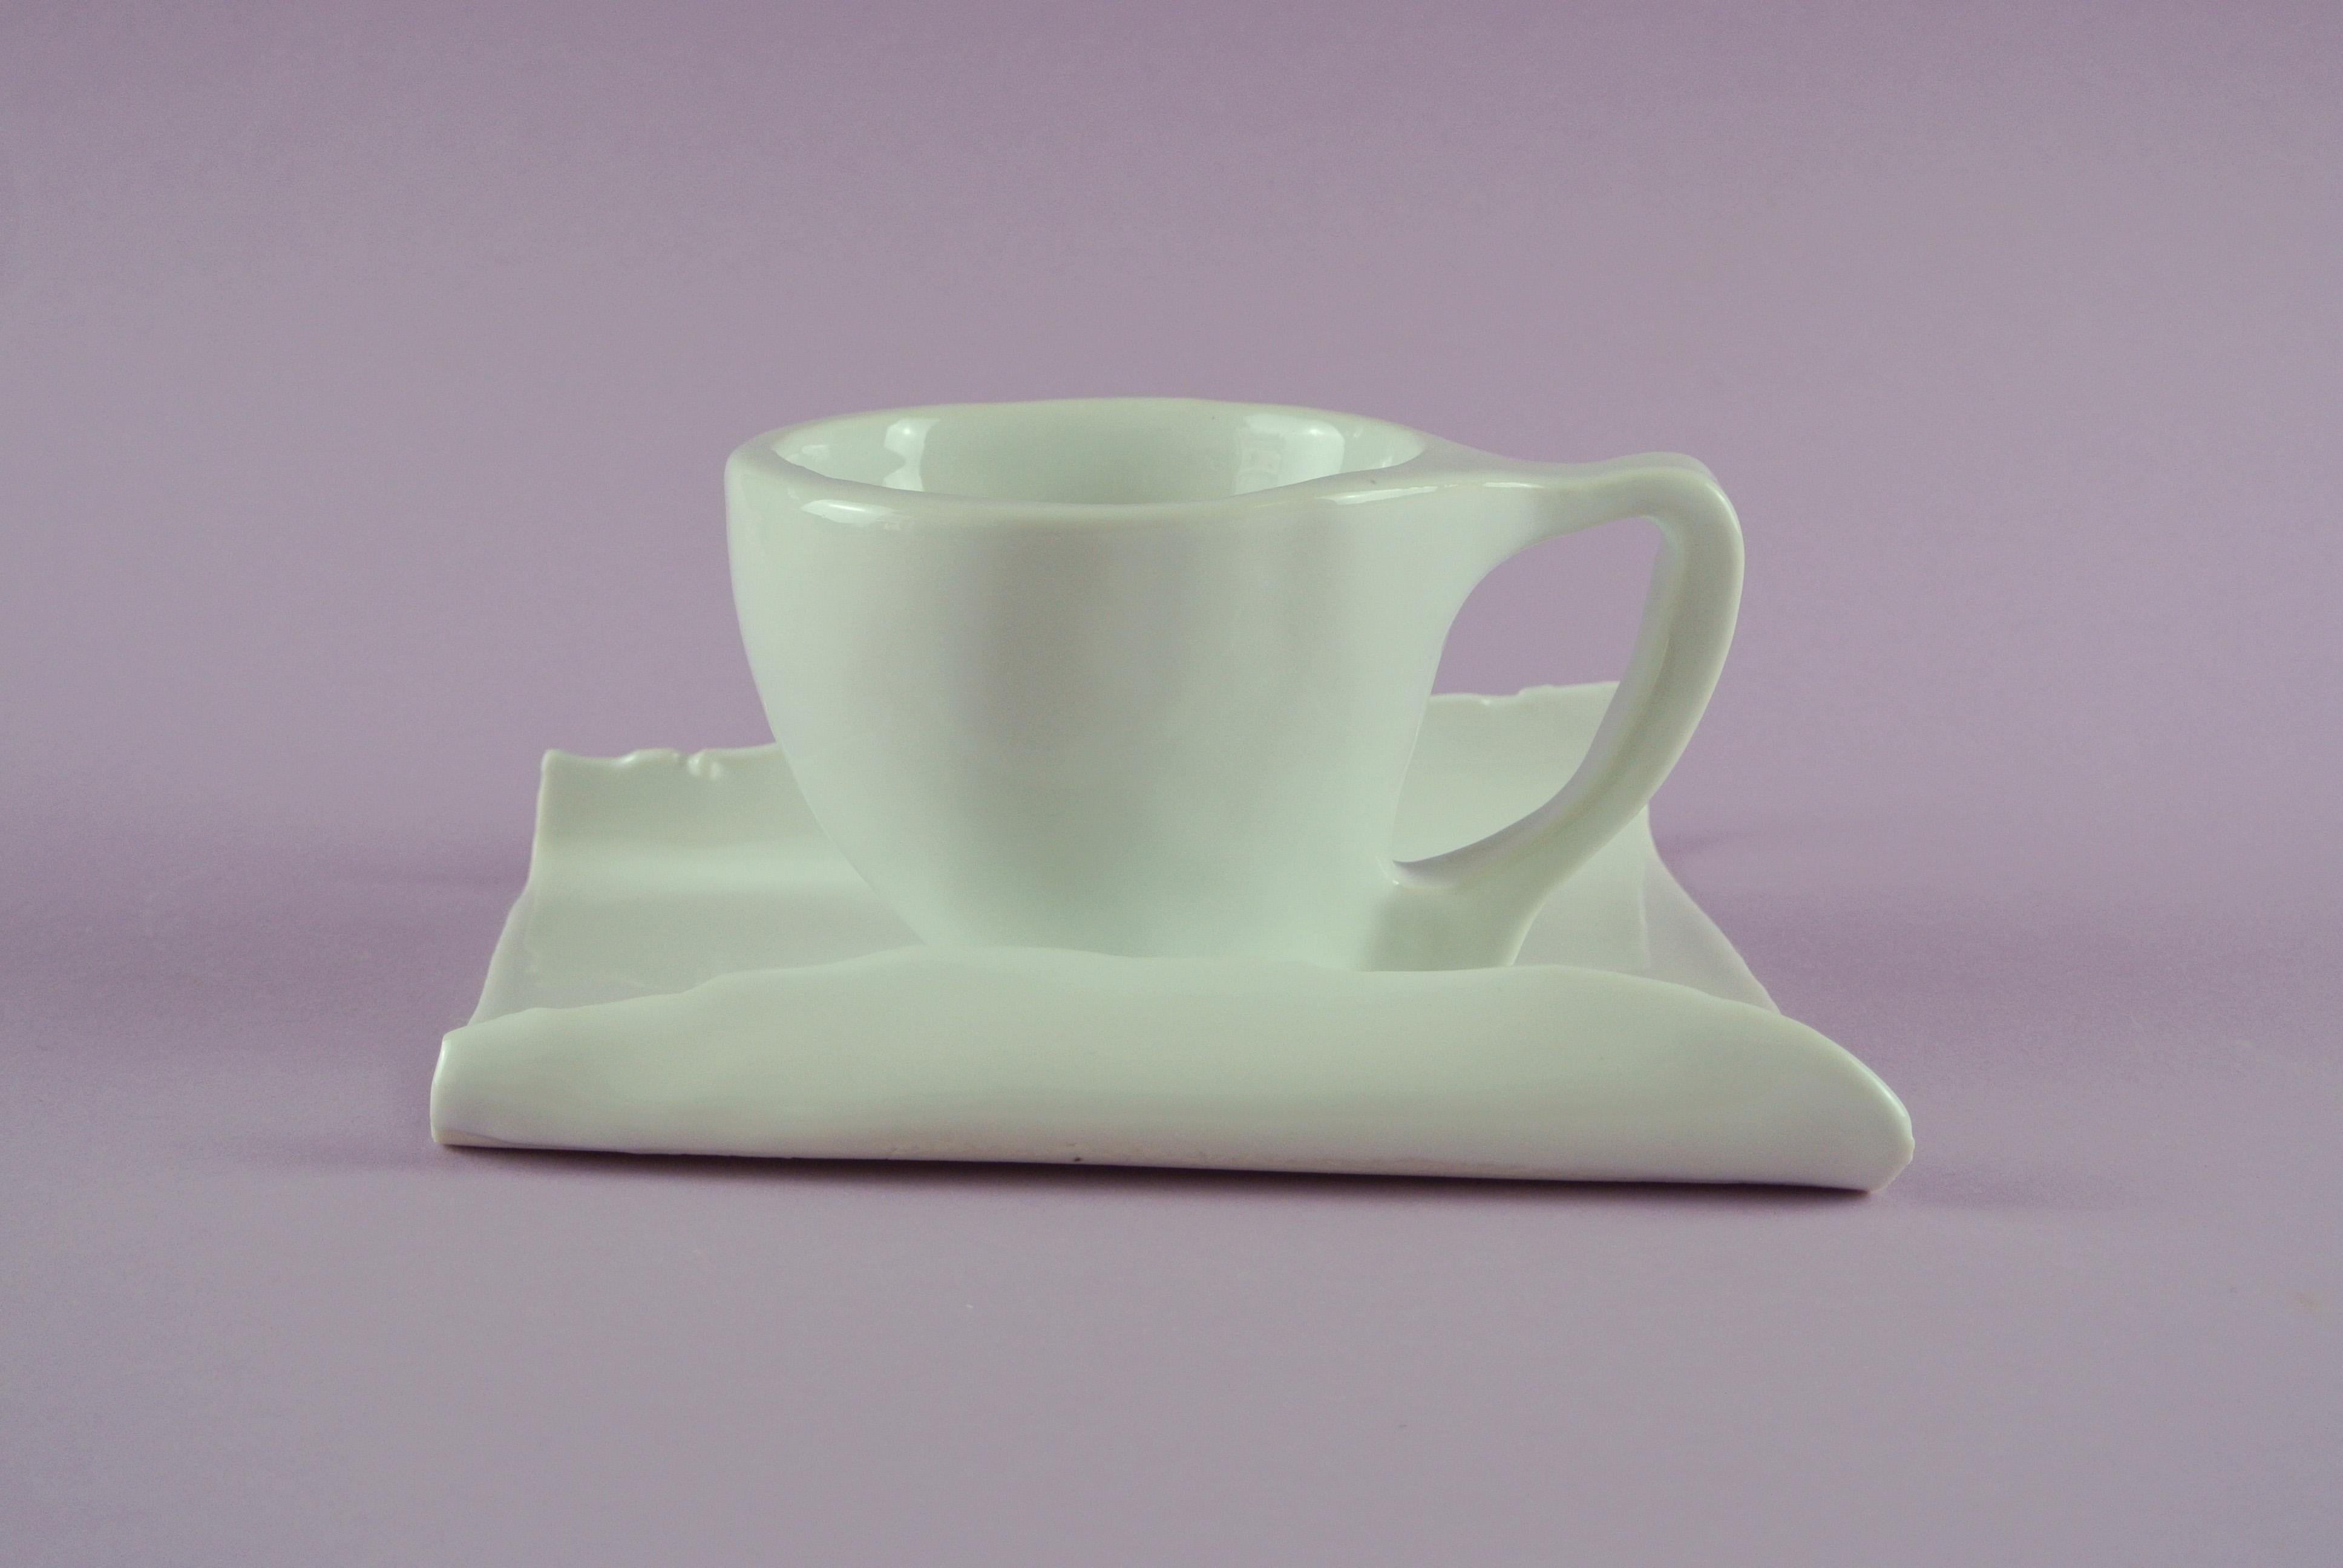 Heavy porcelain cup with handle and thin, asymmetric tray with raw edges.
Hand build and glazed with white glossy glaze.